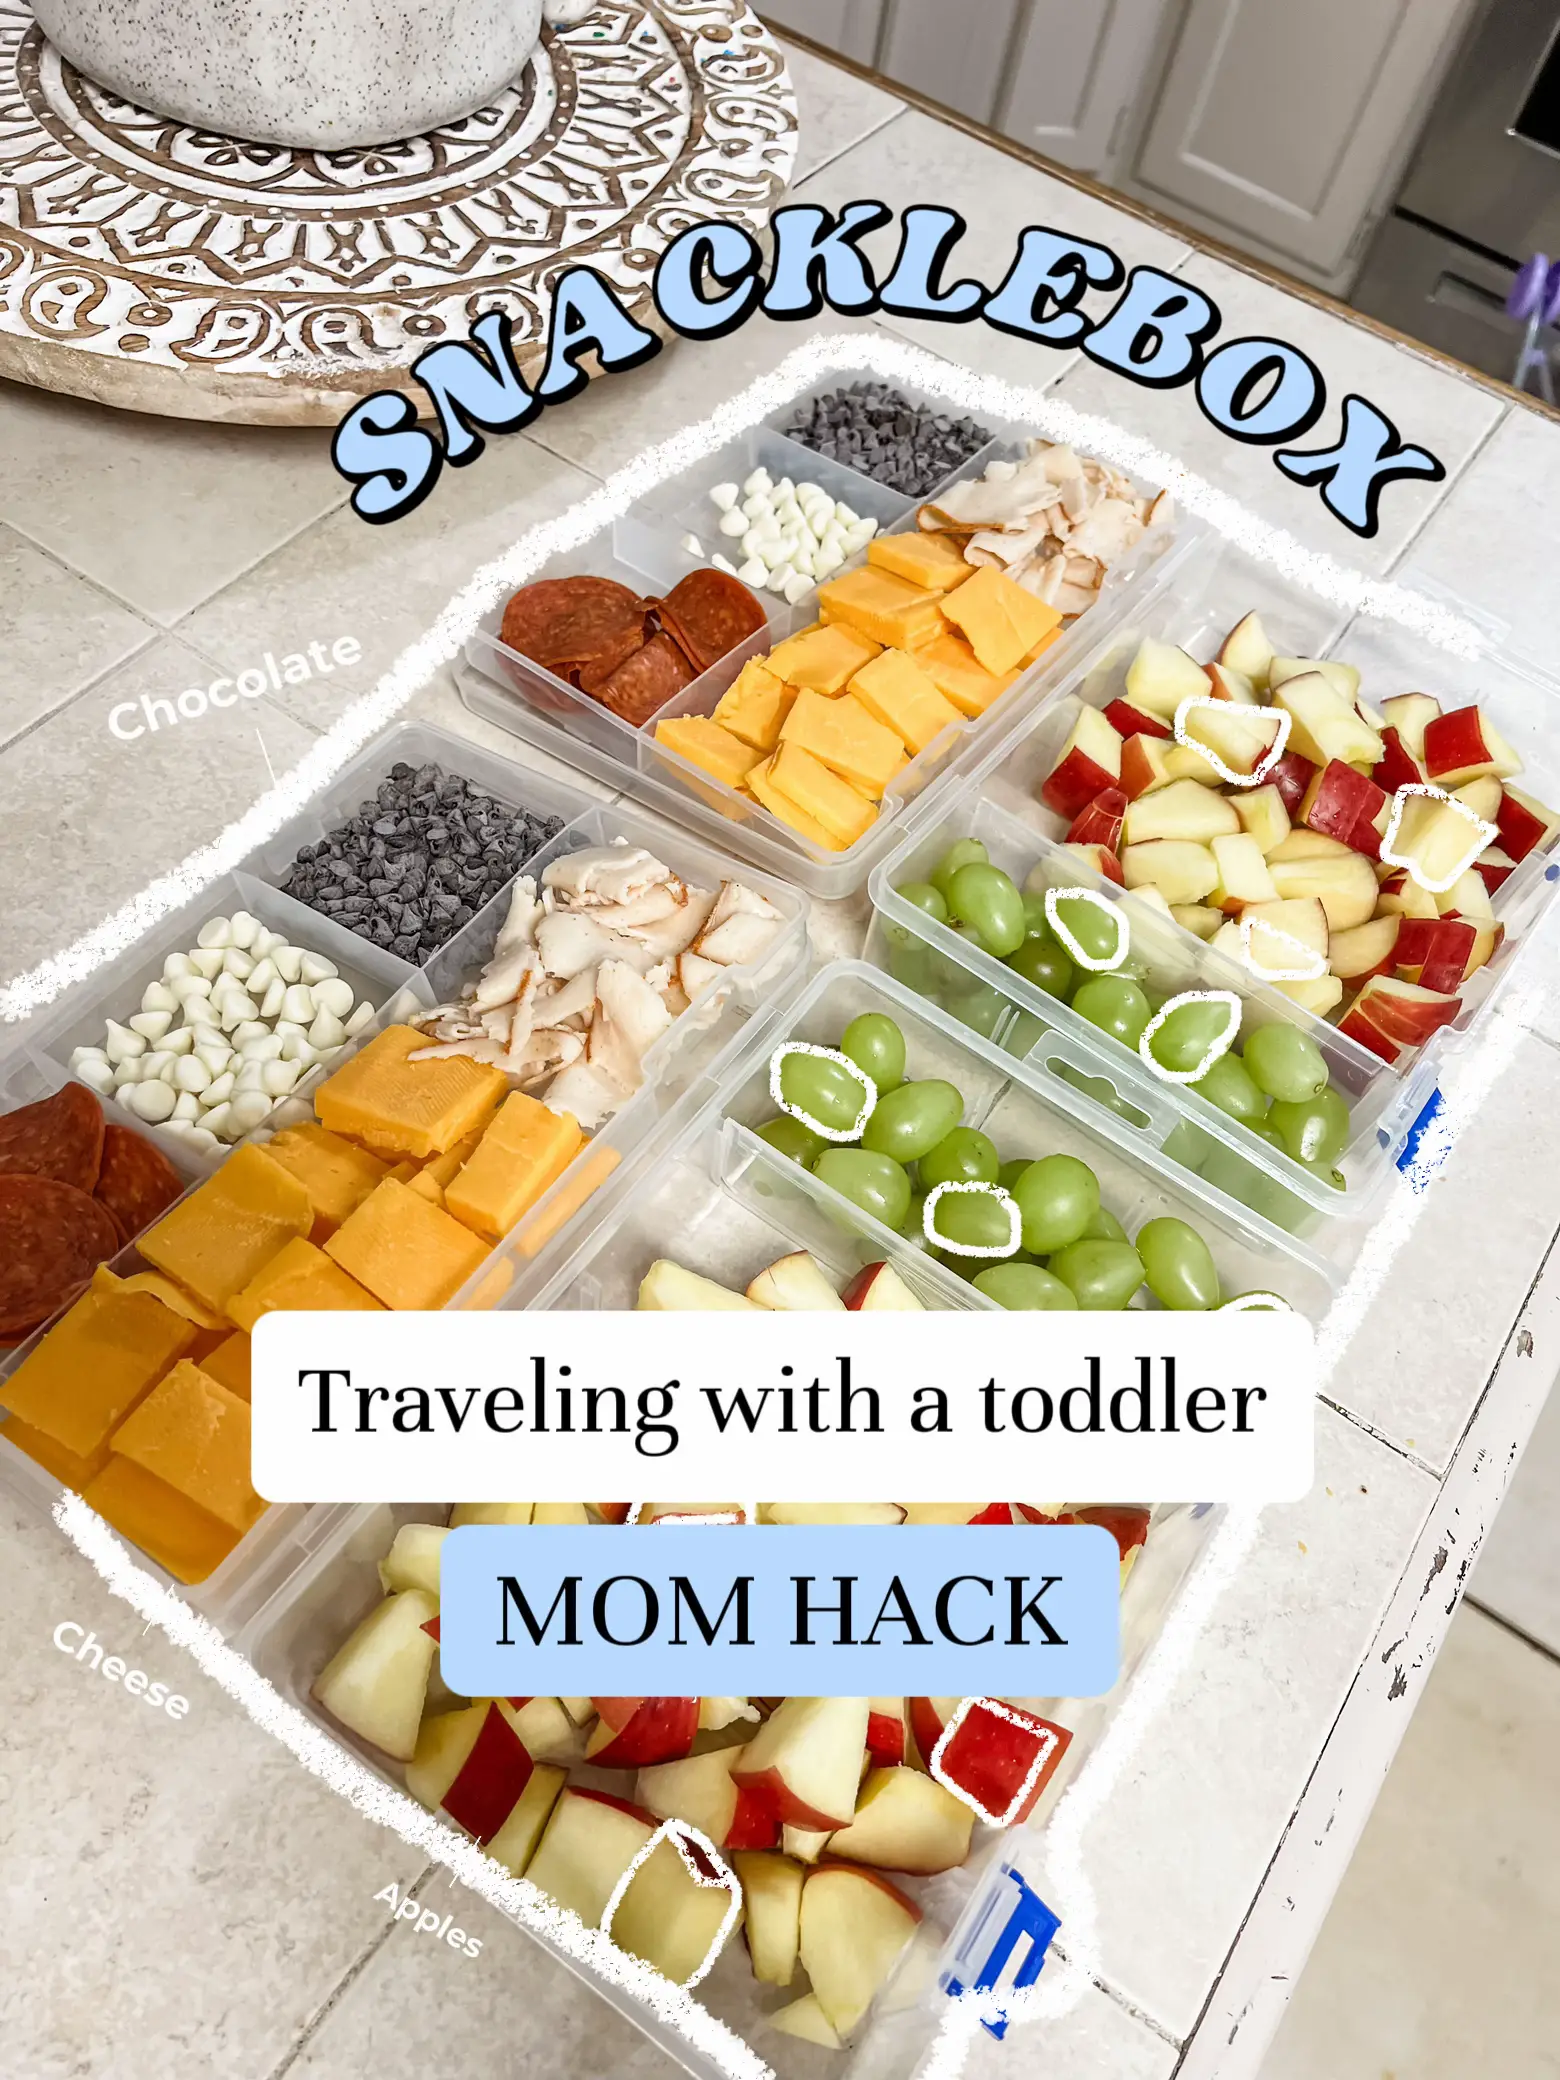 MOM HACK: Traveling with a toddler 🍎🧀🍫, Gallery posted by Ashlyn  Edwards